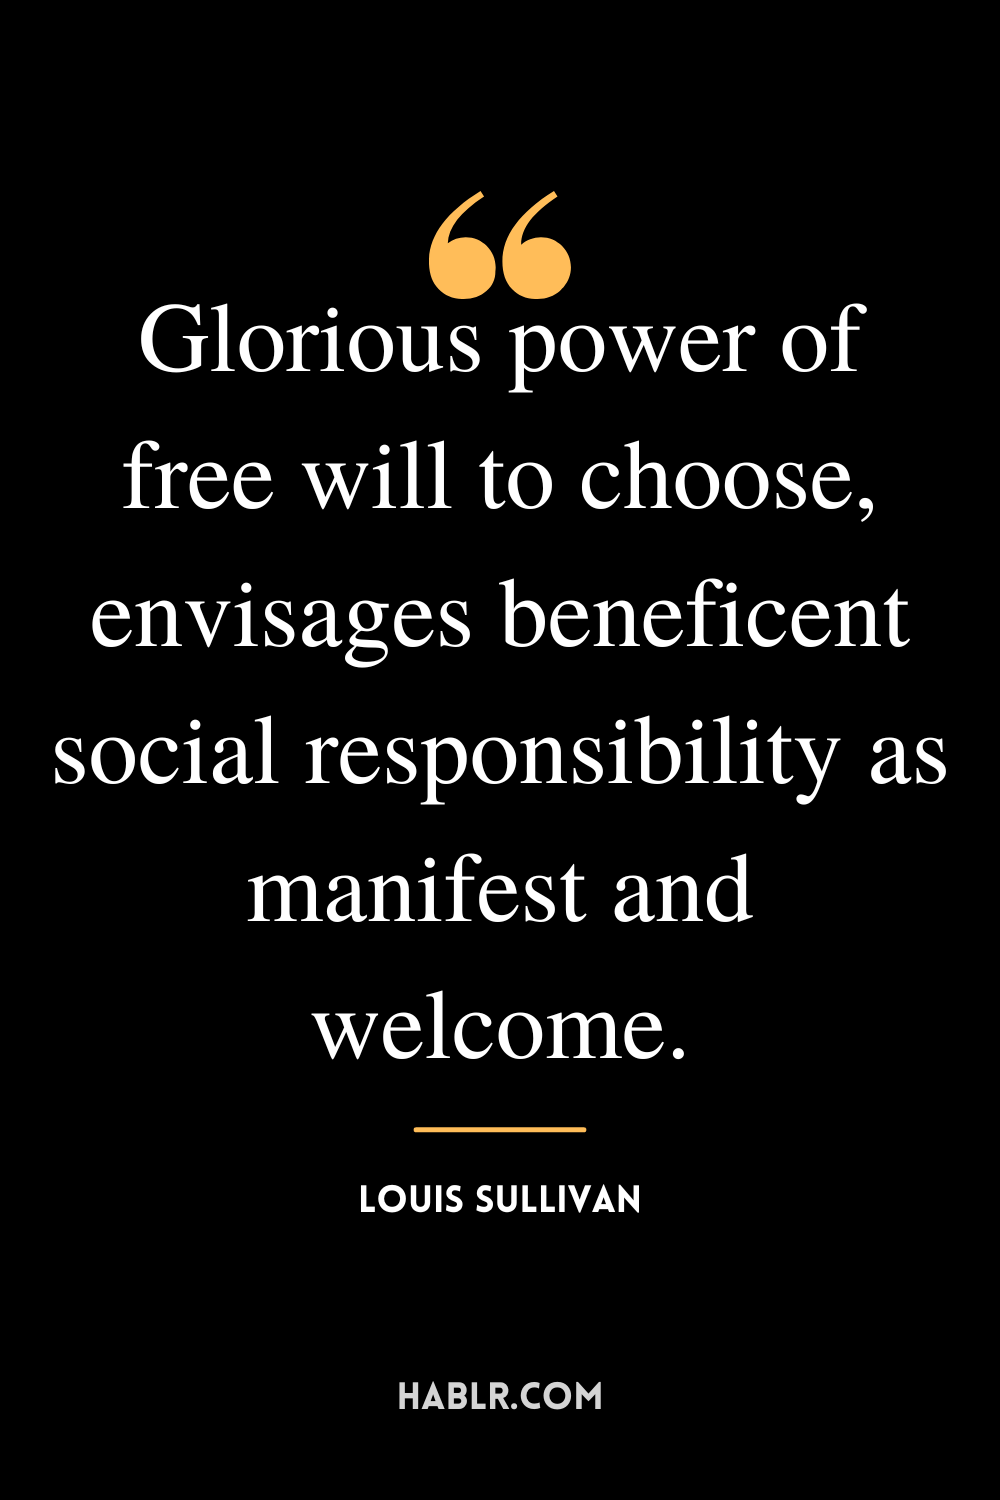 “Glorious power of free will to choose, envisages beneficent social responsibility as manifest and welcome.” -Louis Sullivan